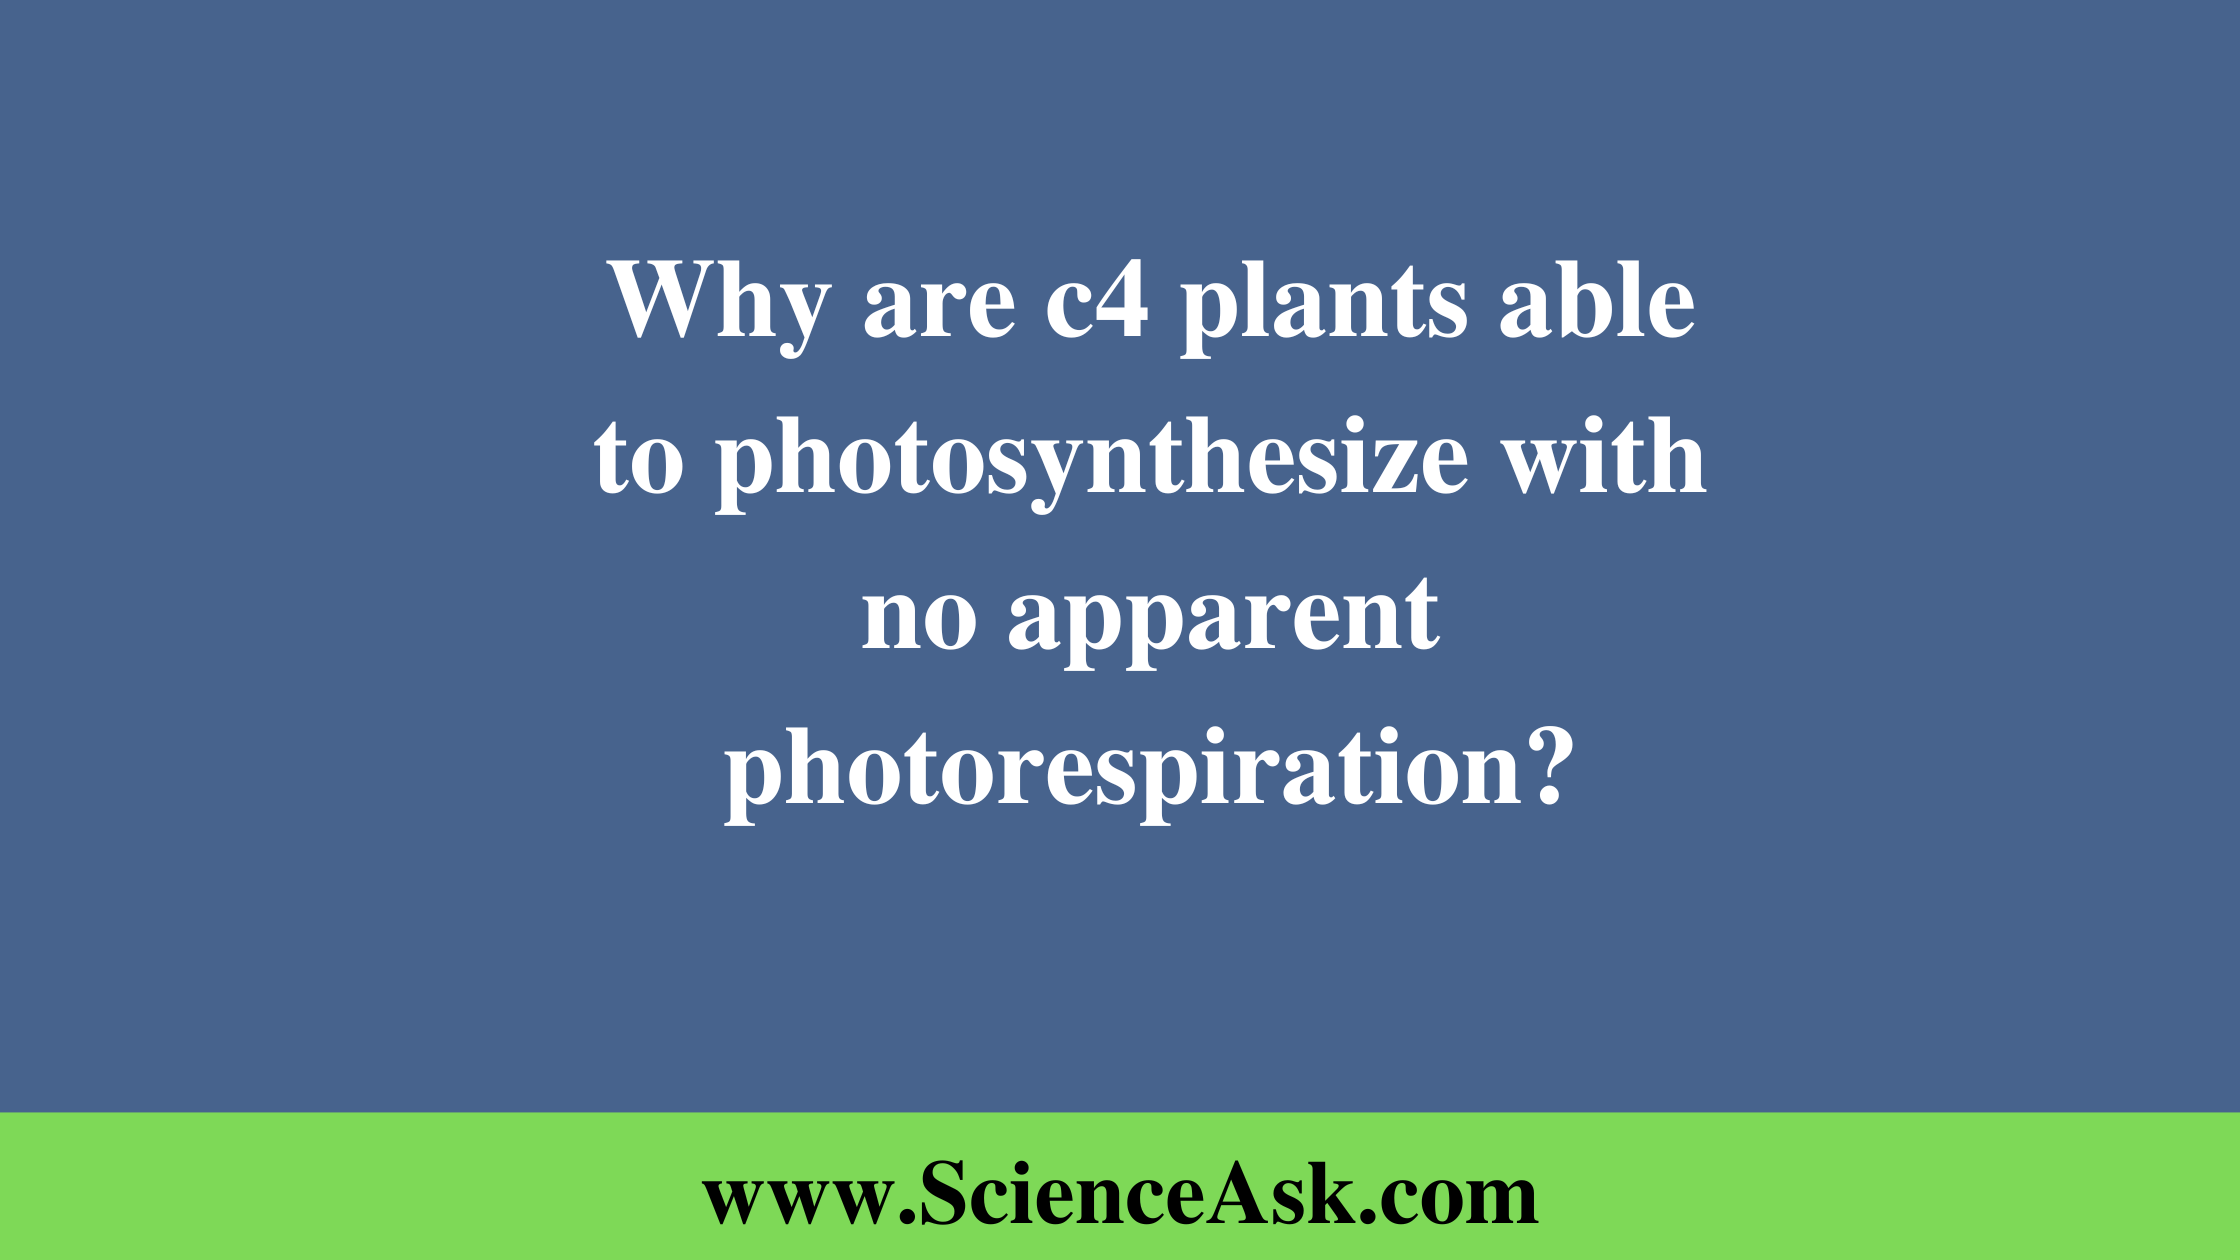 Why are c4 plants able to photosynthesize with no apparent photorespiration?